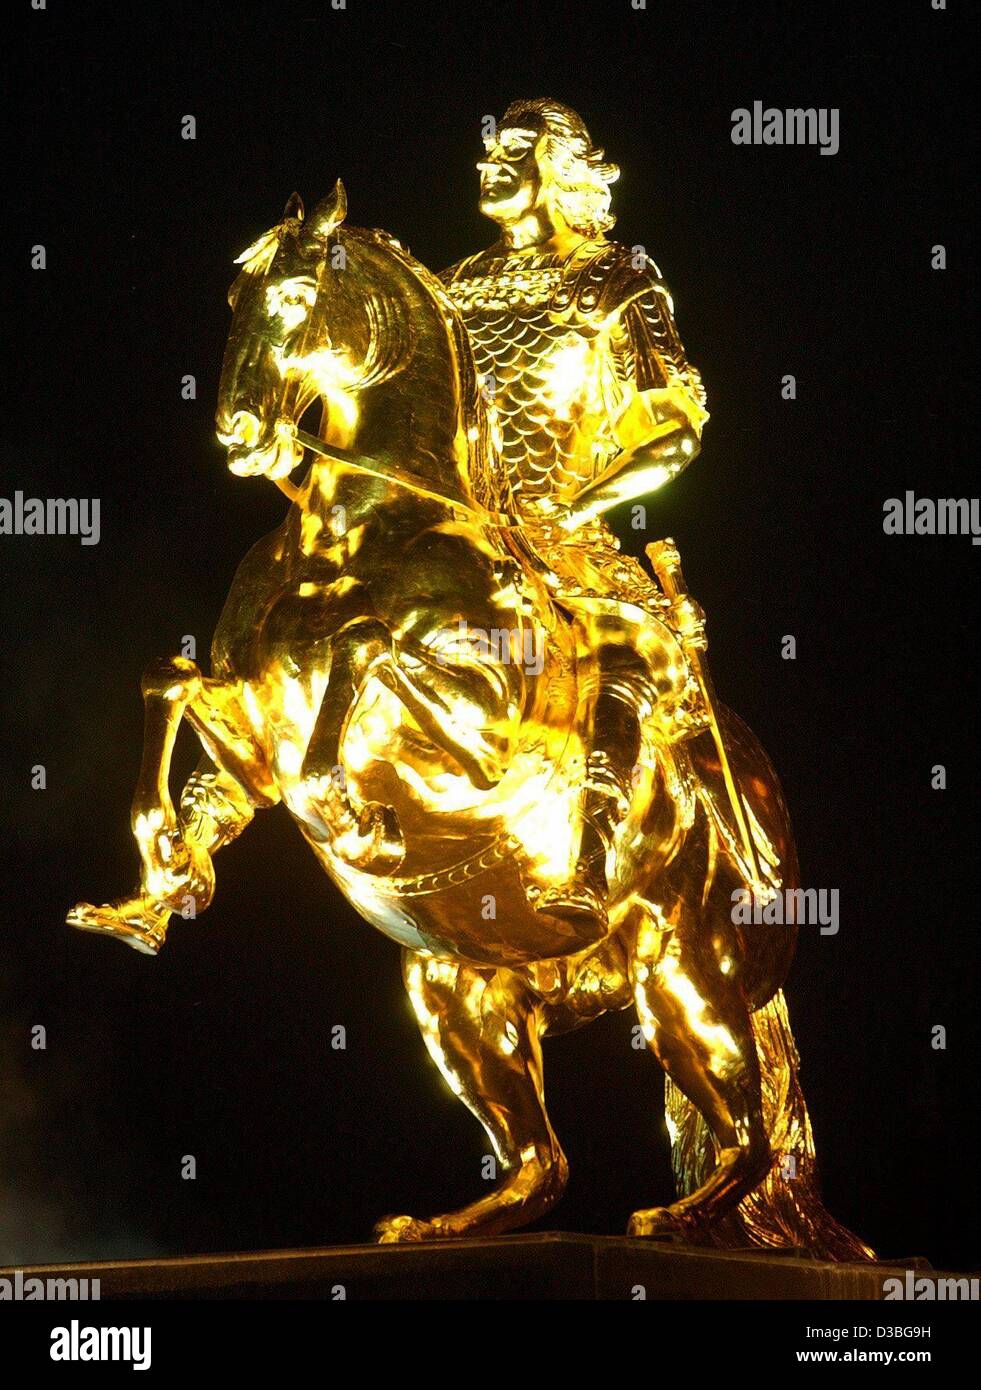 (dpa) - A view of the golden statue of a horseman glaring in beam of a spotlight at night in Dresden, Germany, 20 June 2003. The statue depicts the German elector and Polish king August der Starke (August the strong) (1670 to 1733). The statue was erected in 1736 and has been recently restored to it Stock Photo